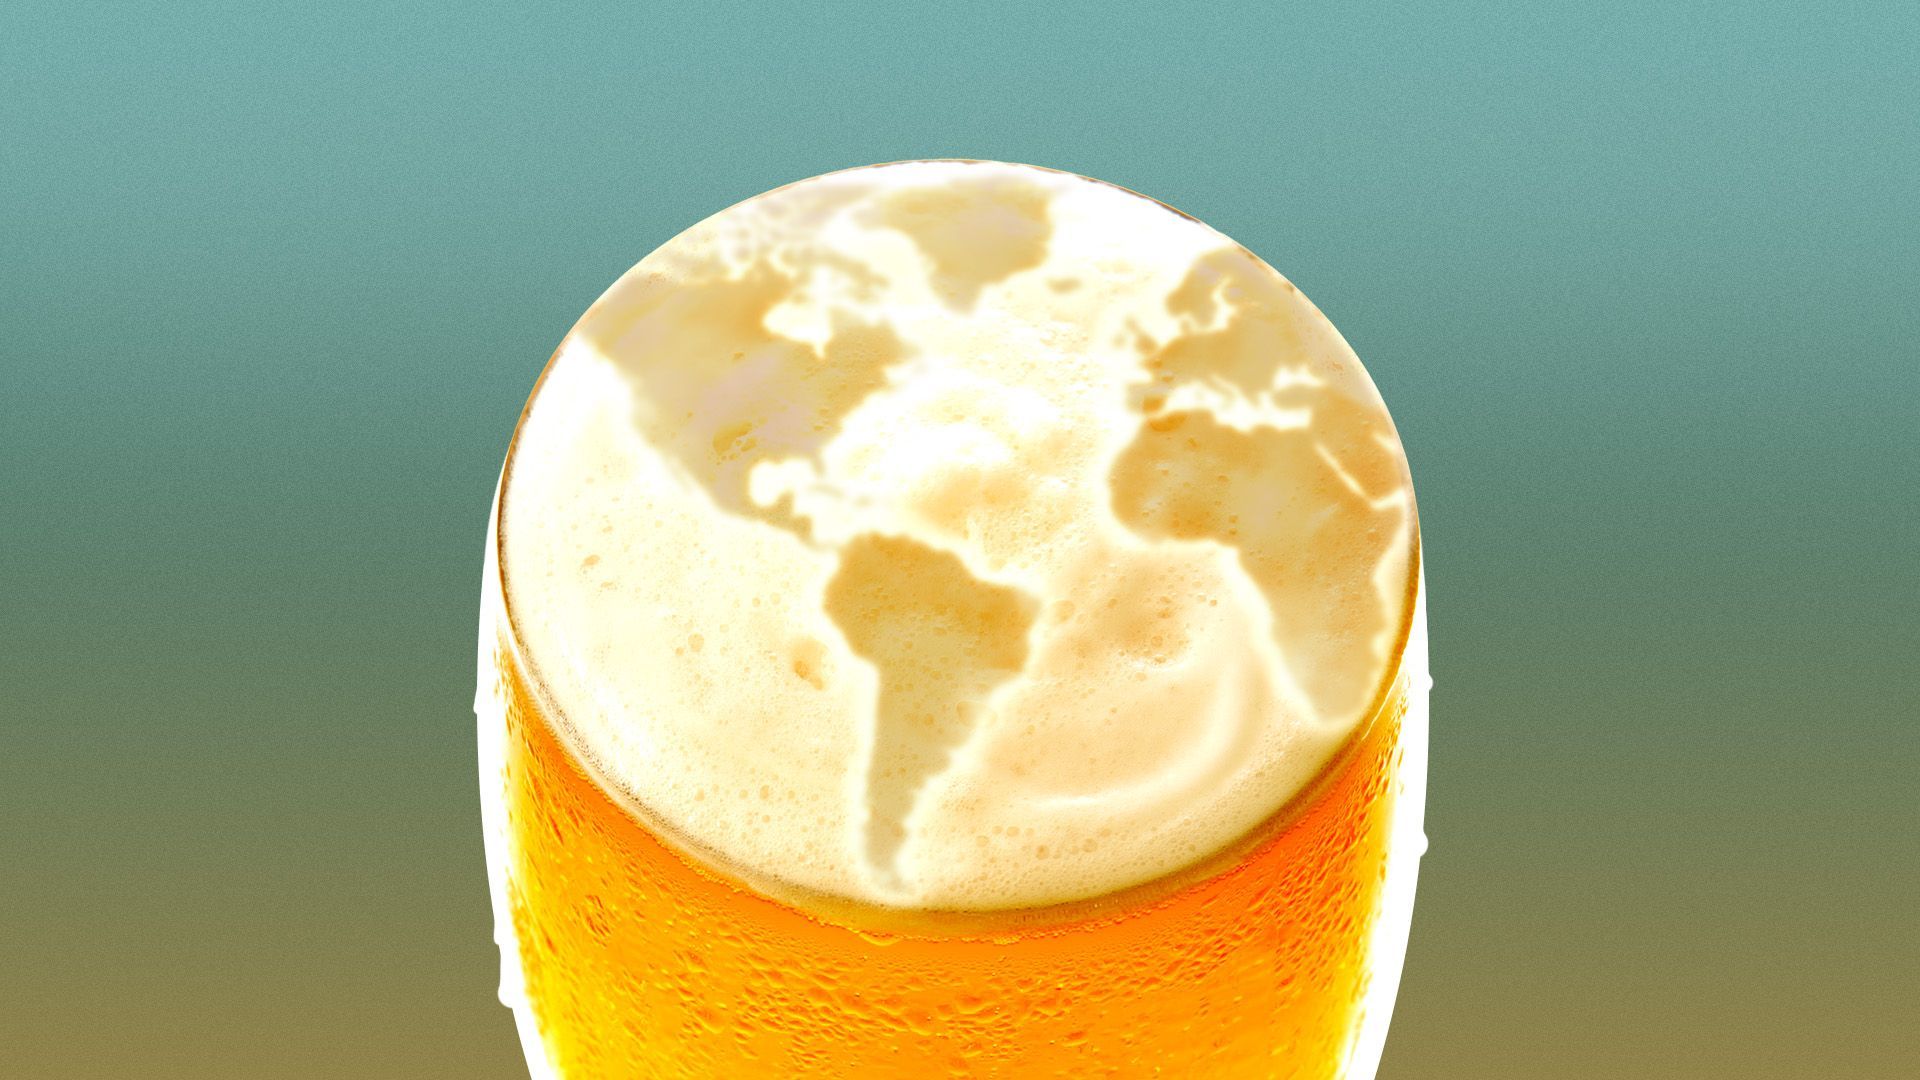 Illustration of a mug of beer with the foam in the shape of a globe